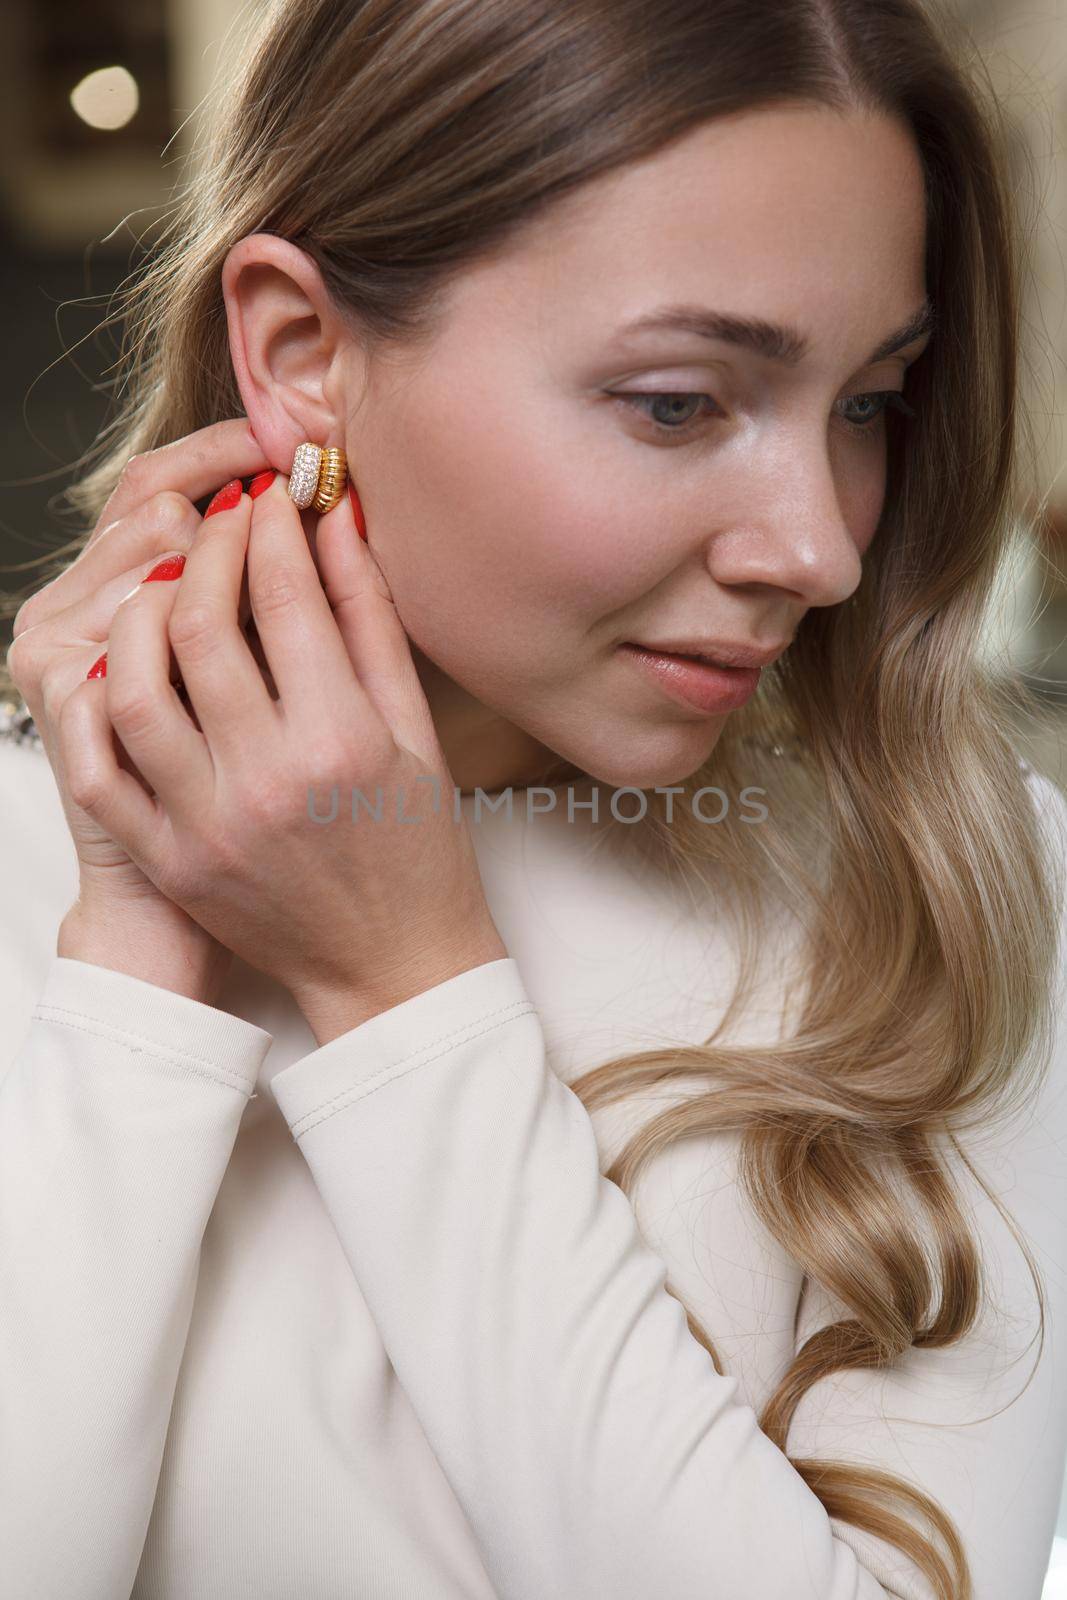 Vertical close up of a beautiful woman trying on diamond earrings